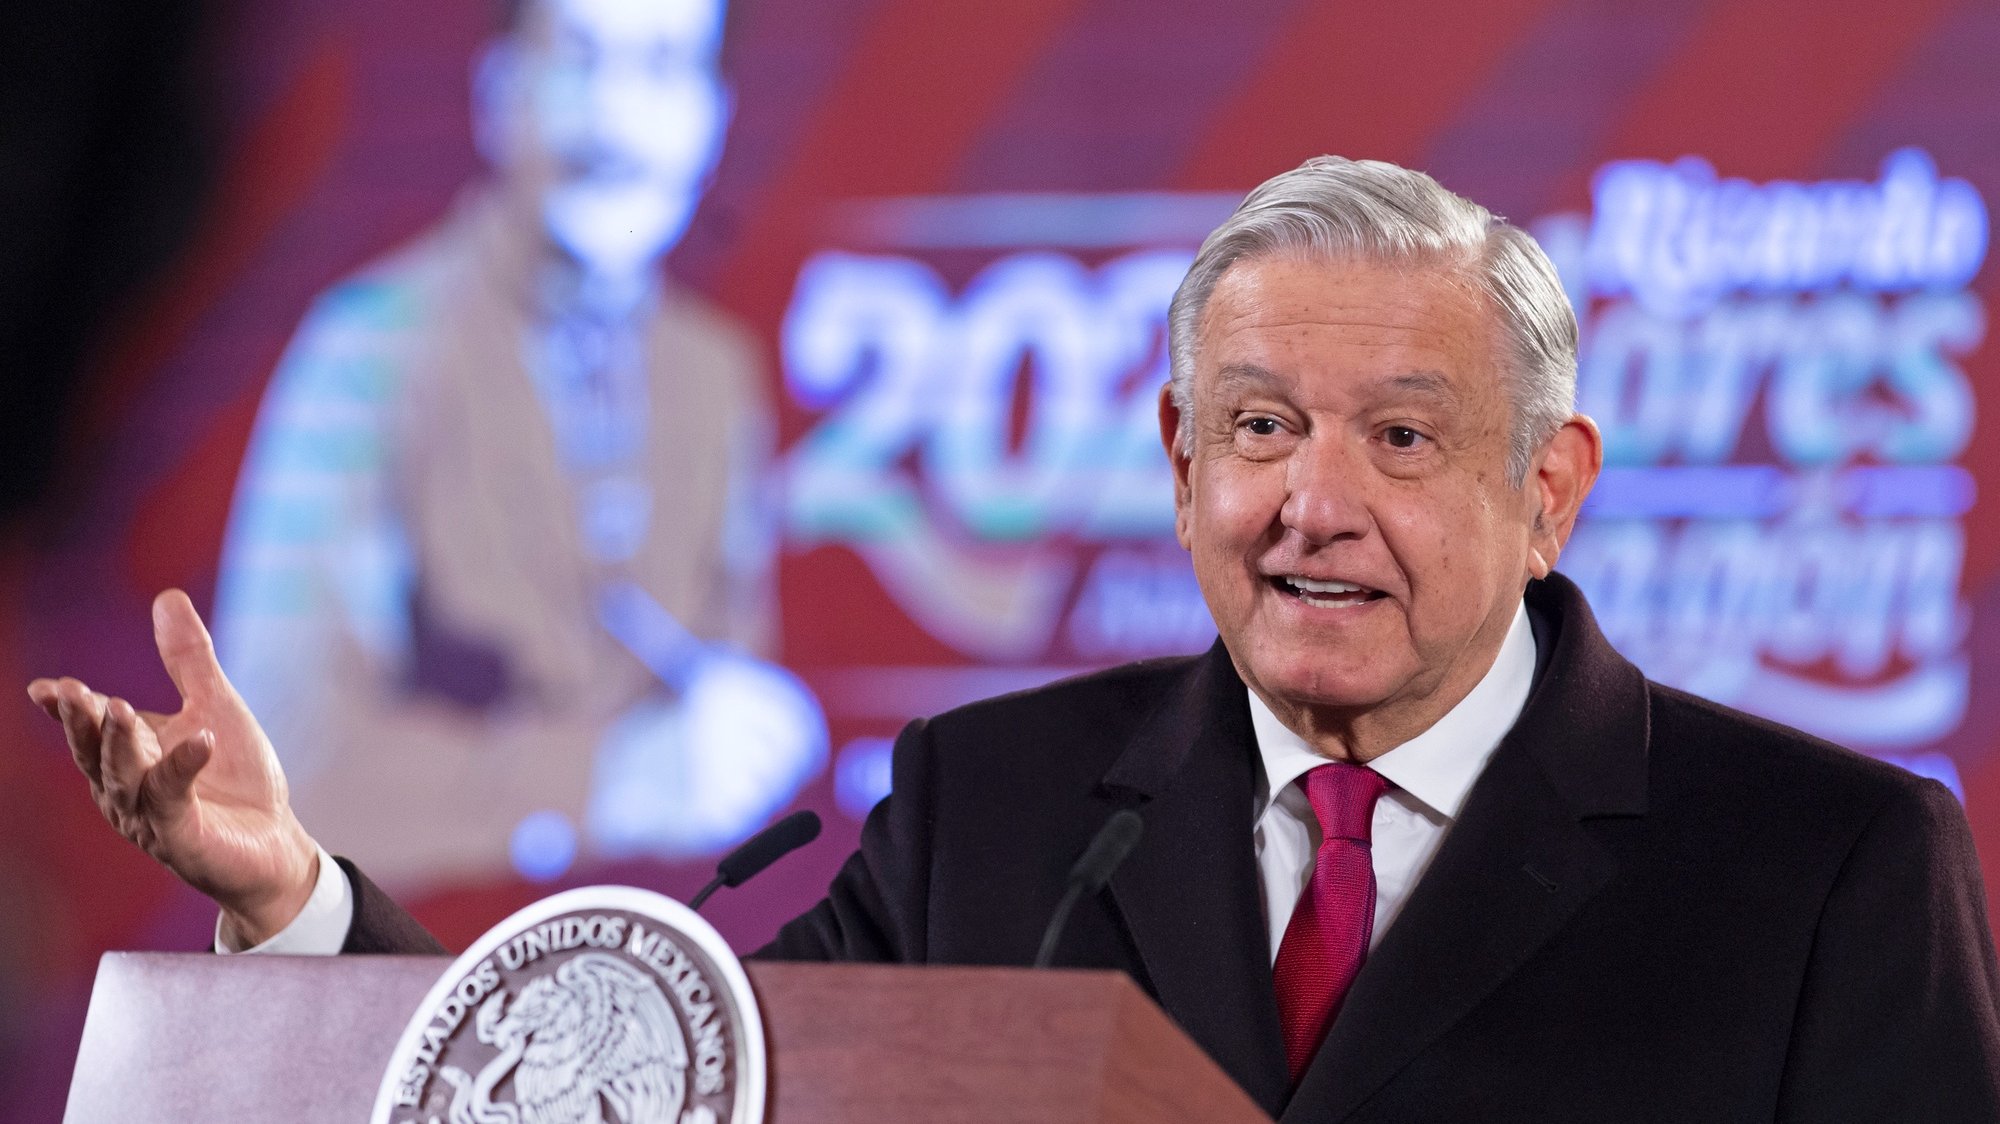 epa09677398 A handout photo made available by the Presidency of Mexico shows President Andres Manuel Lopez Obrador during a press conference today at the National Palace in Mexico City, Mexico, 10 January 2022. Lopez Obrador plans to visit different Central American countries this year, although without clarifying the dates, as he announced this 10 January in his morning press conference.  EPA/Mexican Presidency HANDOUT ONLY AVAILABLE TO ILLUSTRATE THE ACCOMPANYING NEWS (MANDATORY CREDIT) HANDOUT EDITORIAL USE ONLY/NO SALES